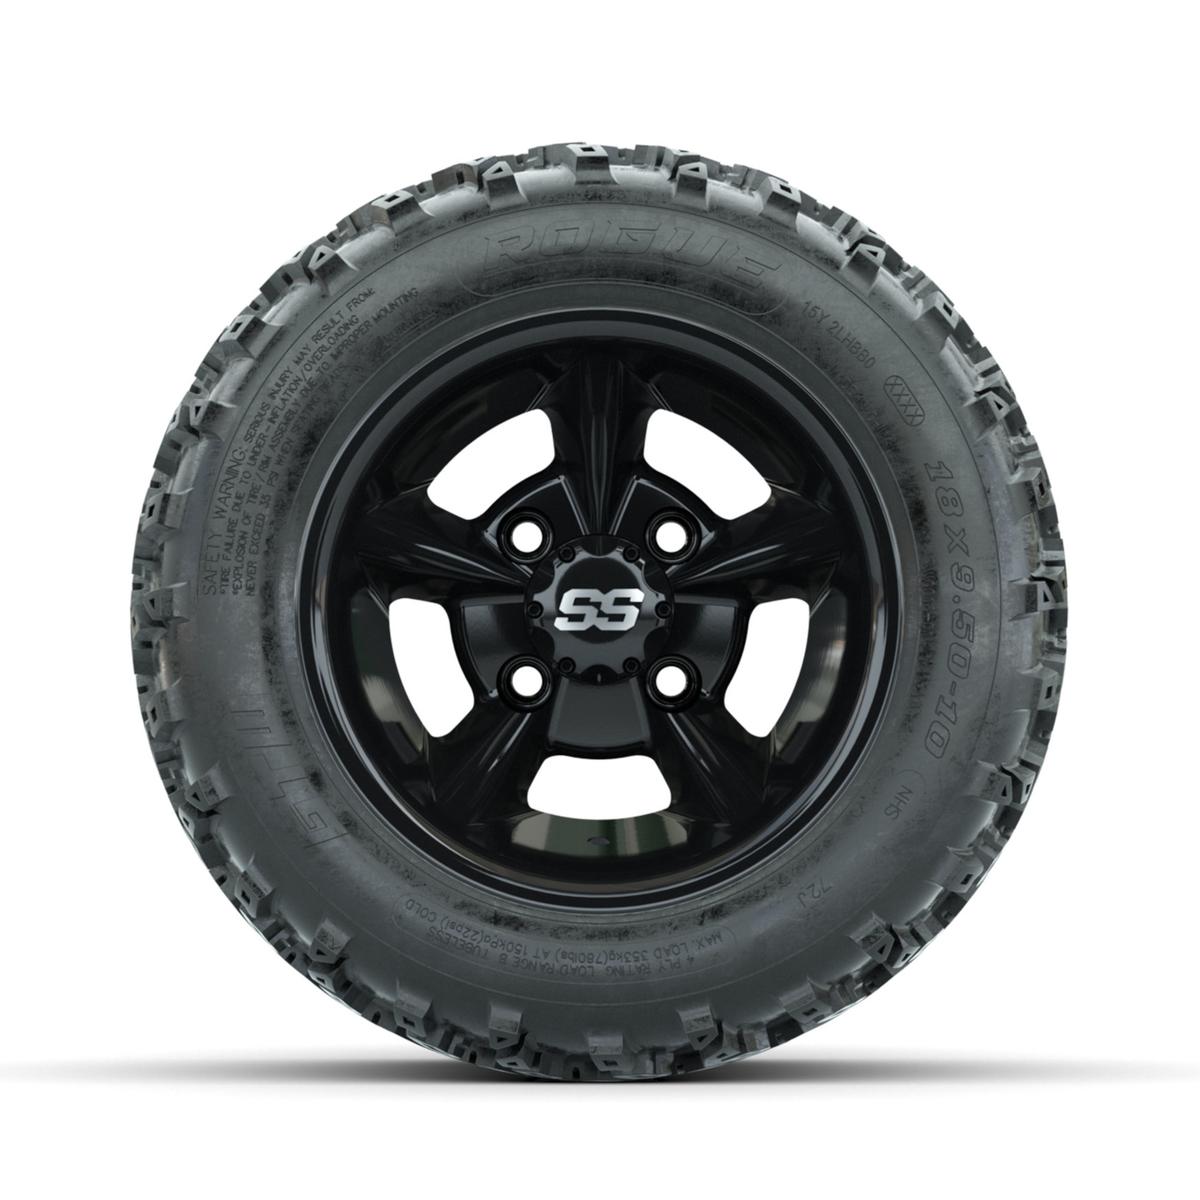 GTW Godfather Black 10 in Wheels with 18x9.50-10 Rogue All Terrain Tires – Full Set